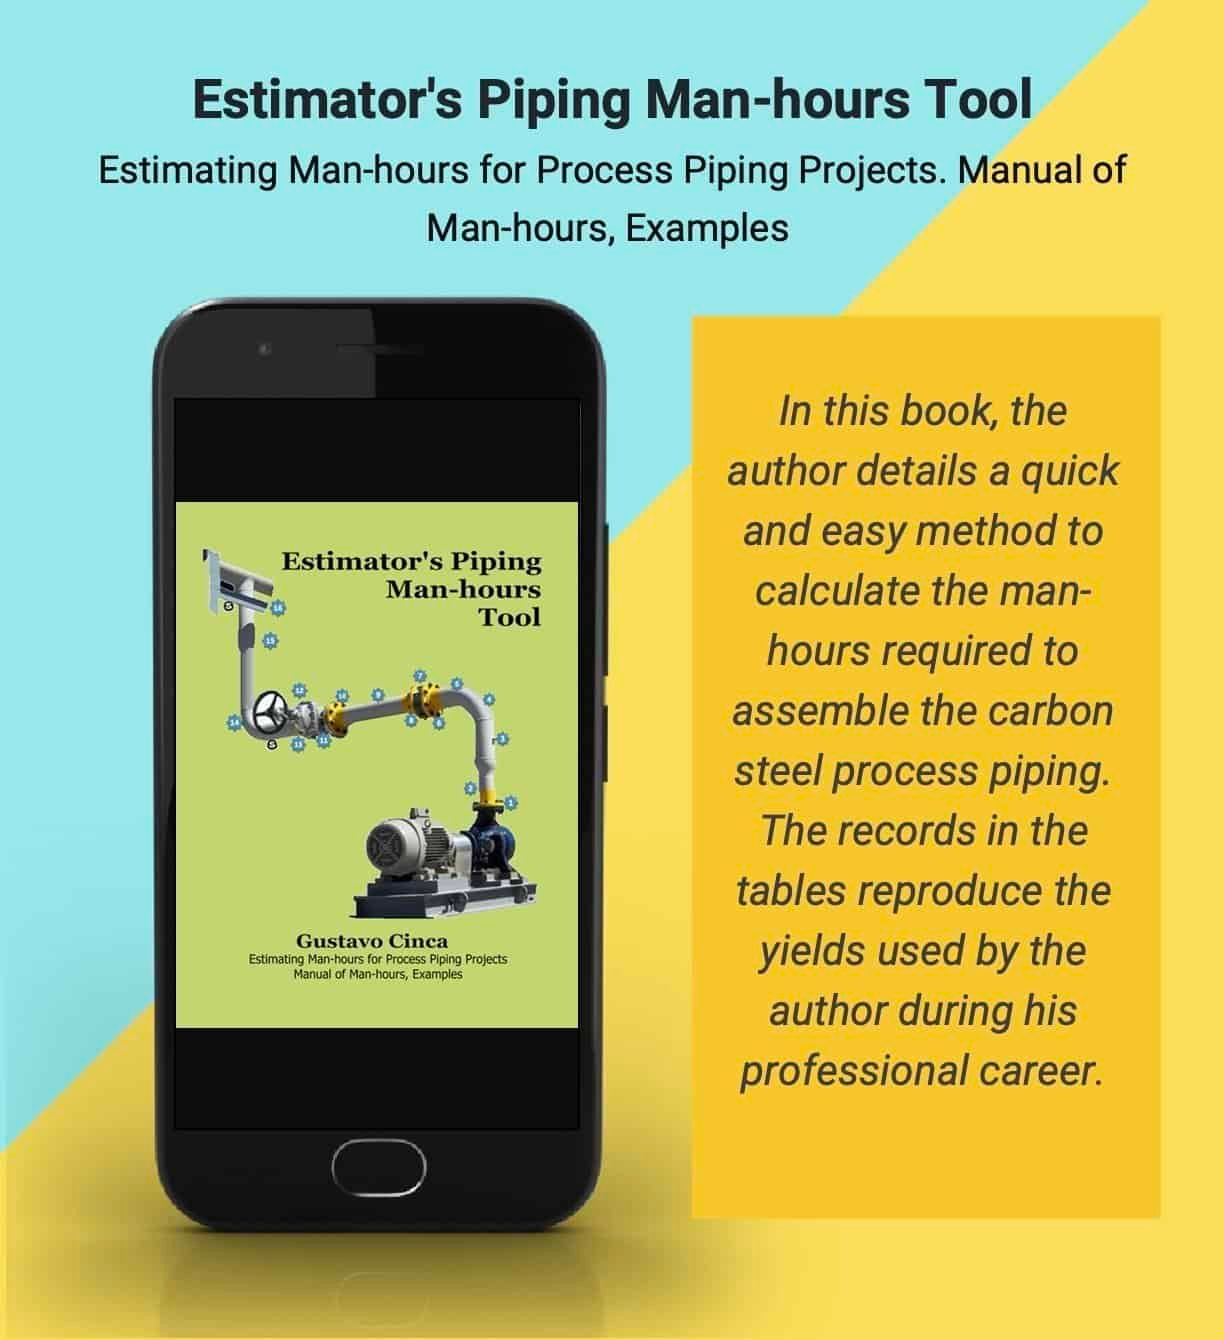 The figure displays a booklet with the cover and a brief description of the book: Estimator's Piping Man-hours Tool 